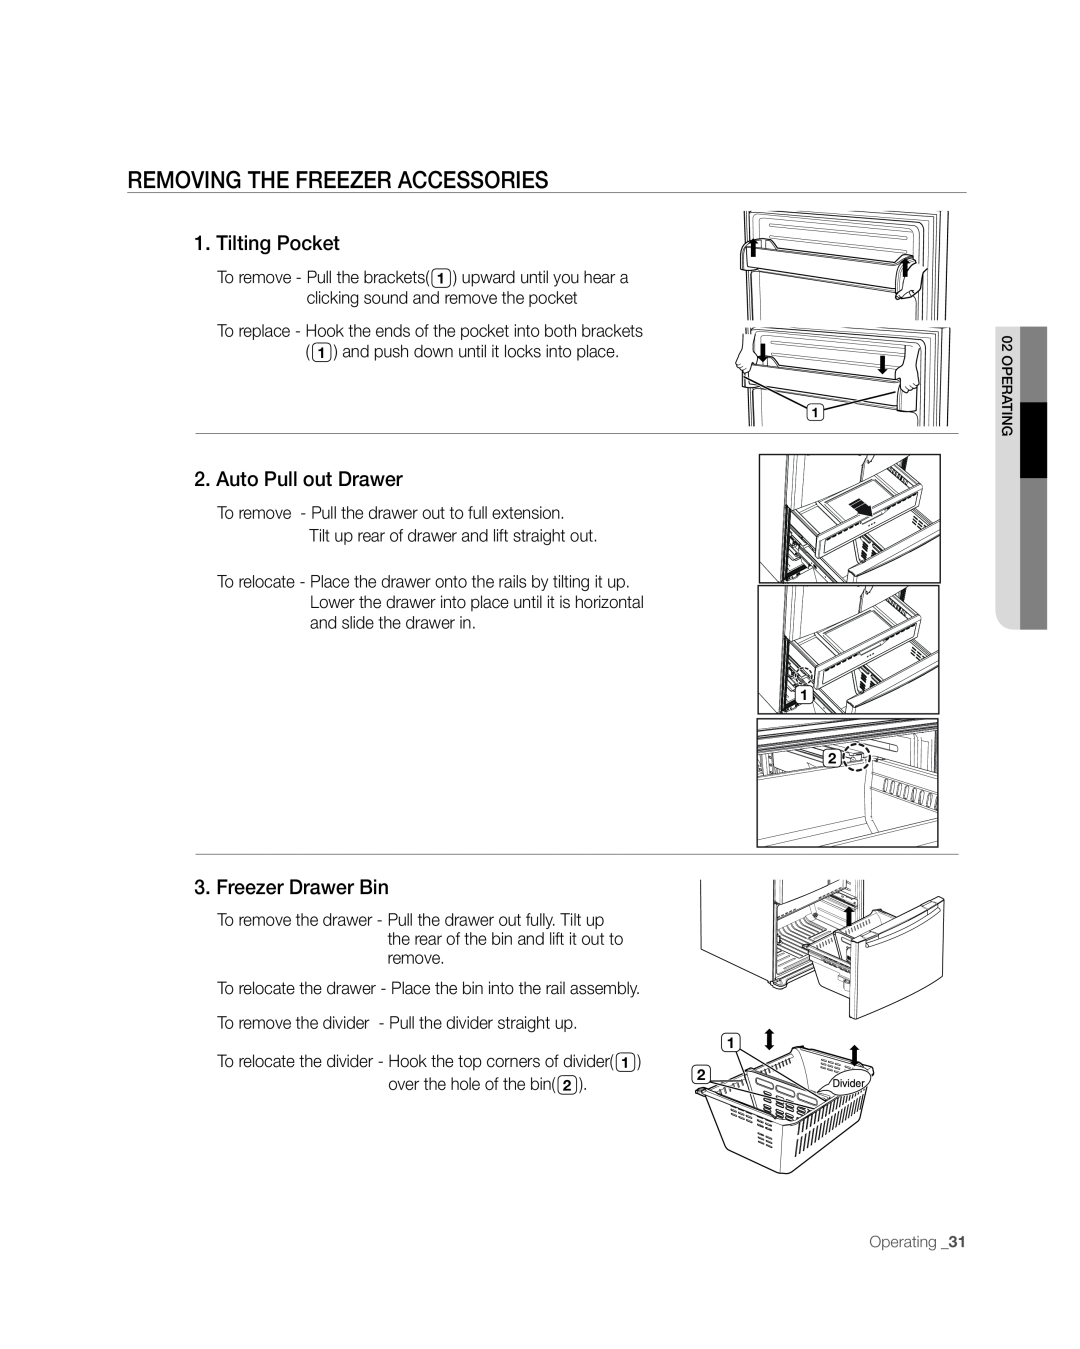 Samsung RFG297AAWP user manual Removing The Freezer Accessories, Tilting Pocket, Auto Pull out Drawer, Freezer Drawer Bin 